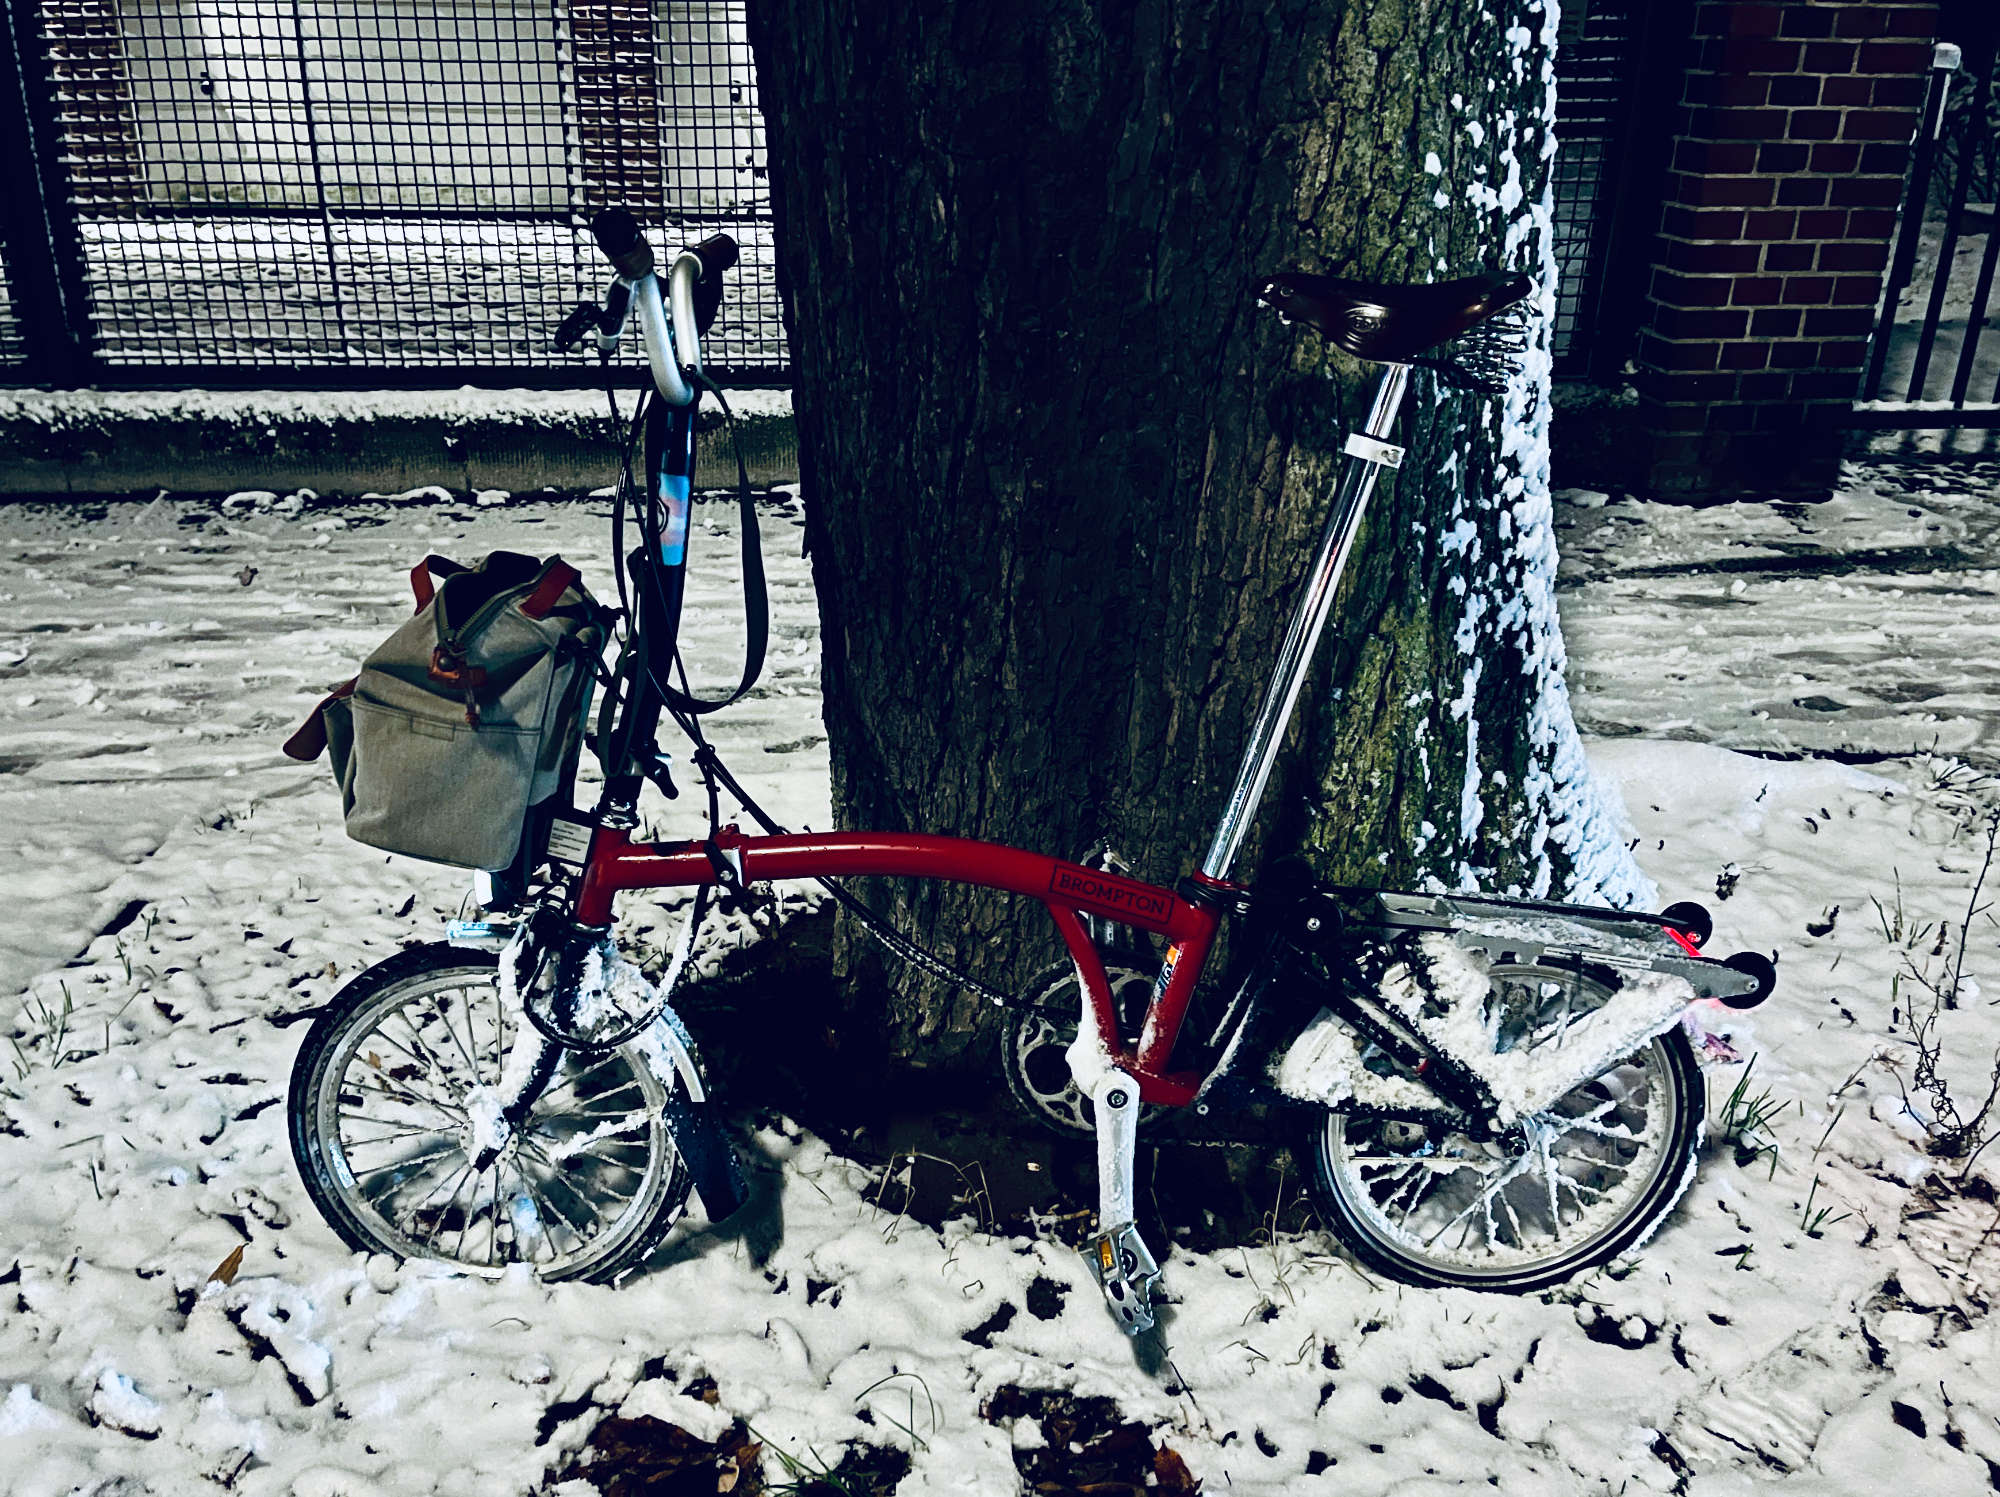 Brompton folding bike covered in snow around the wheels at night